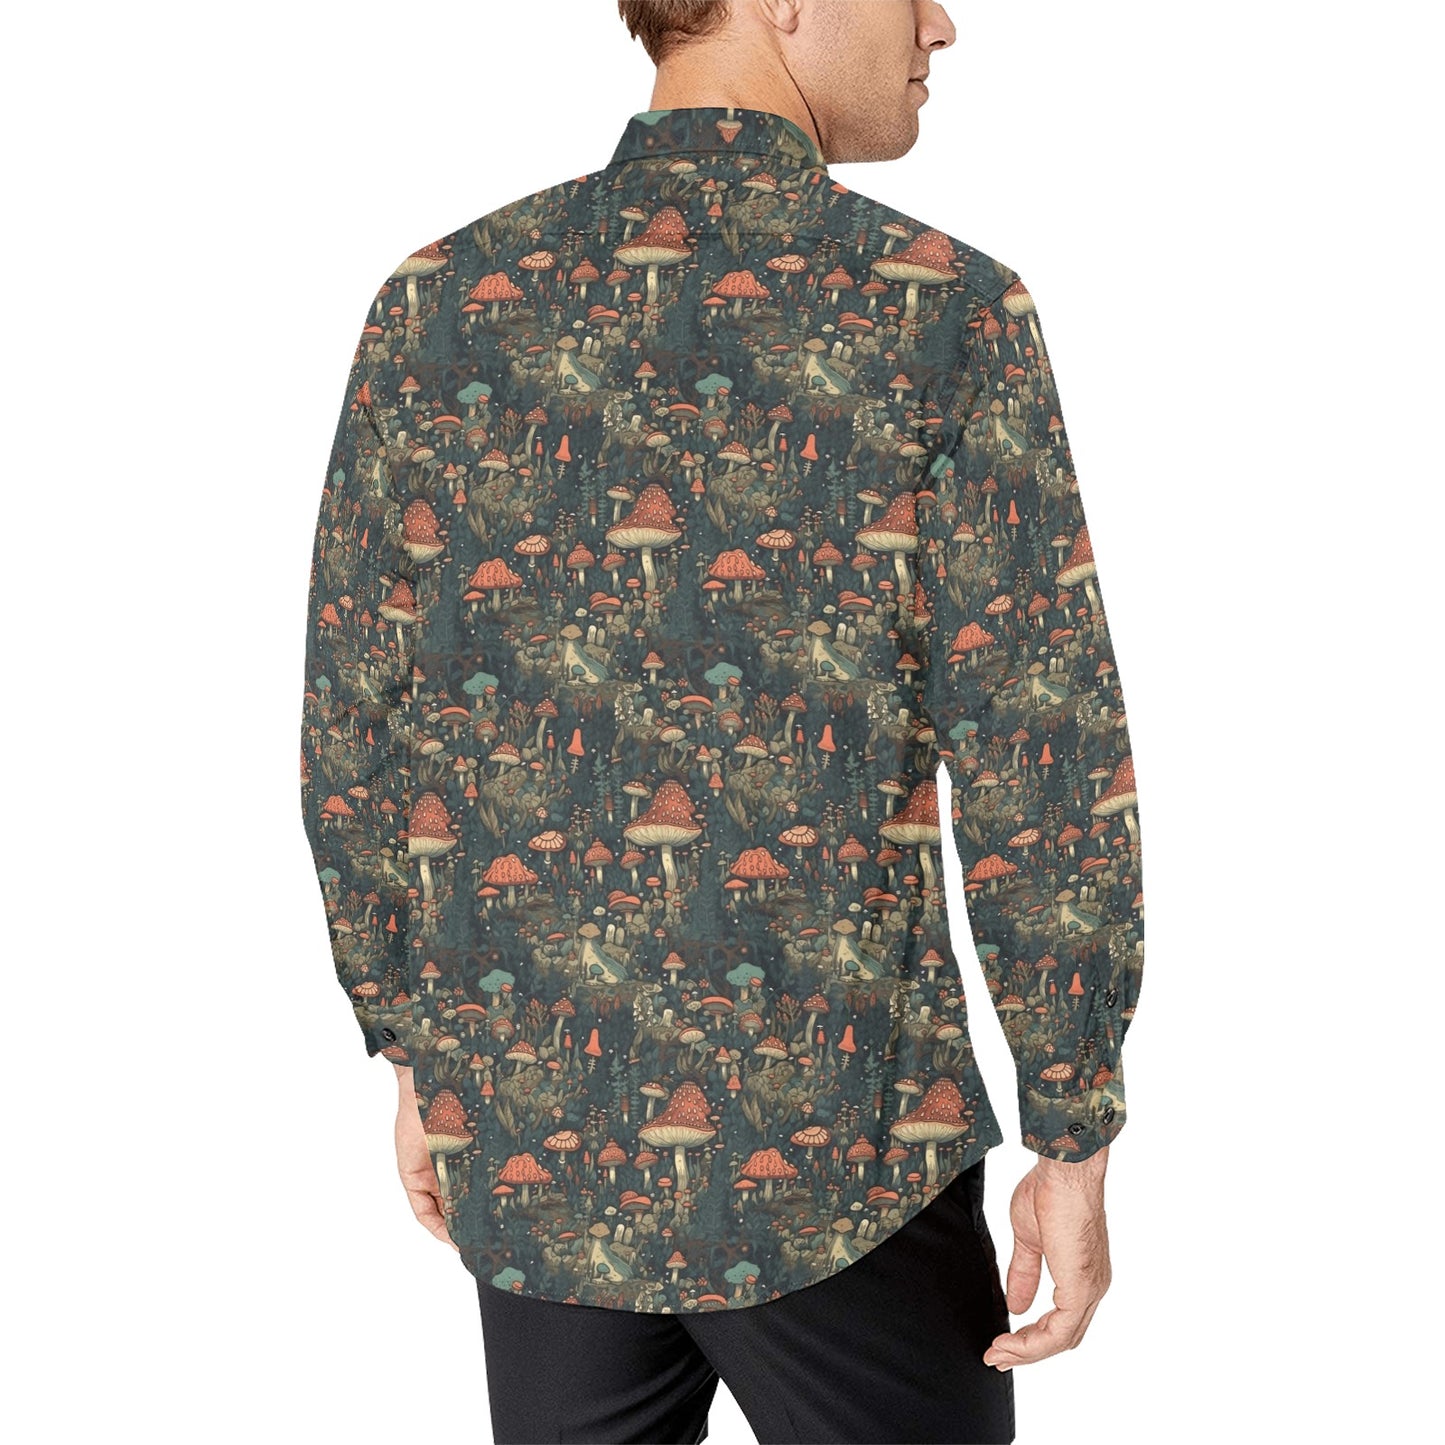 Ancient Forest Long-sleeved button-up shirt